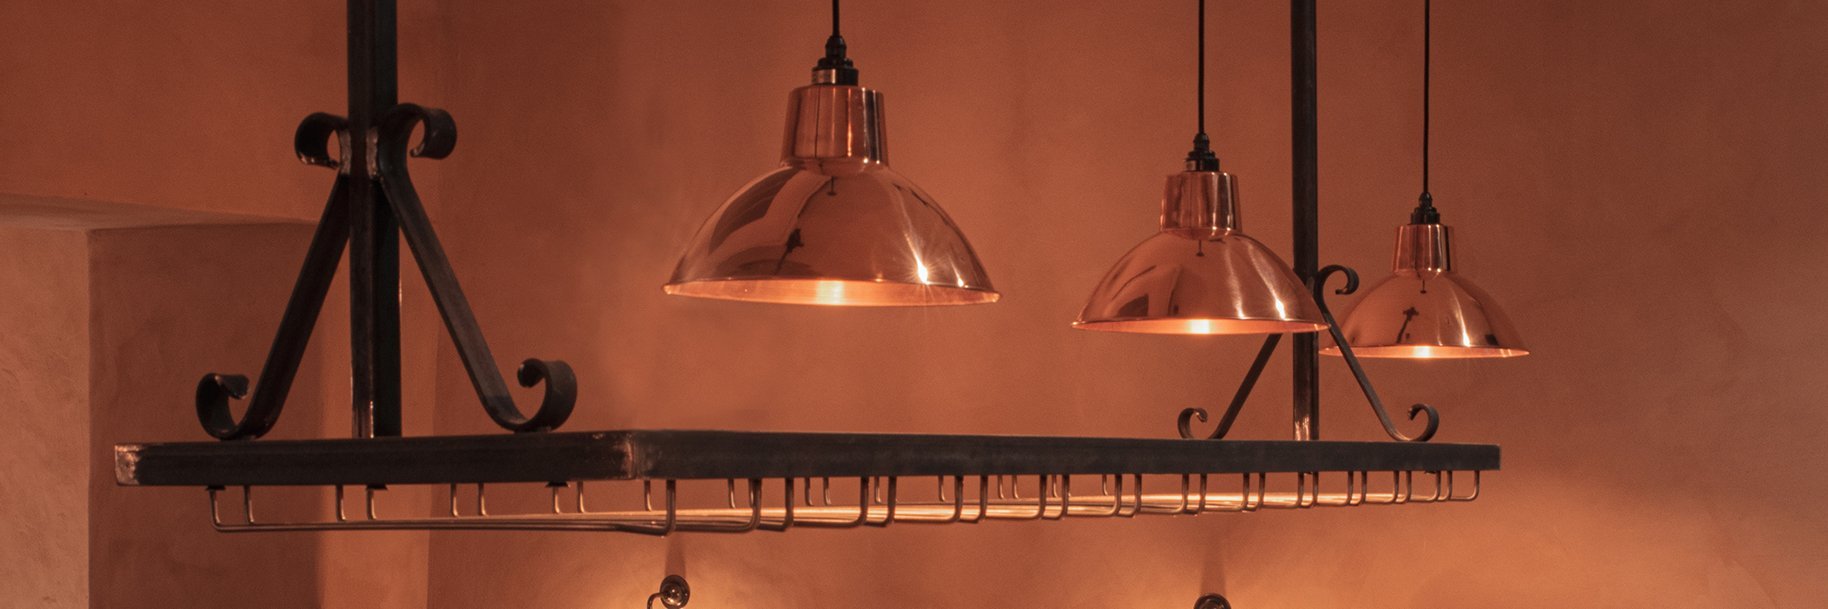 Sleek metal pendant lights cast an industrial glow, perfect for commercial or domestic spaces.